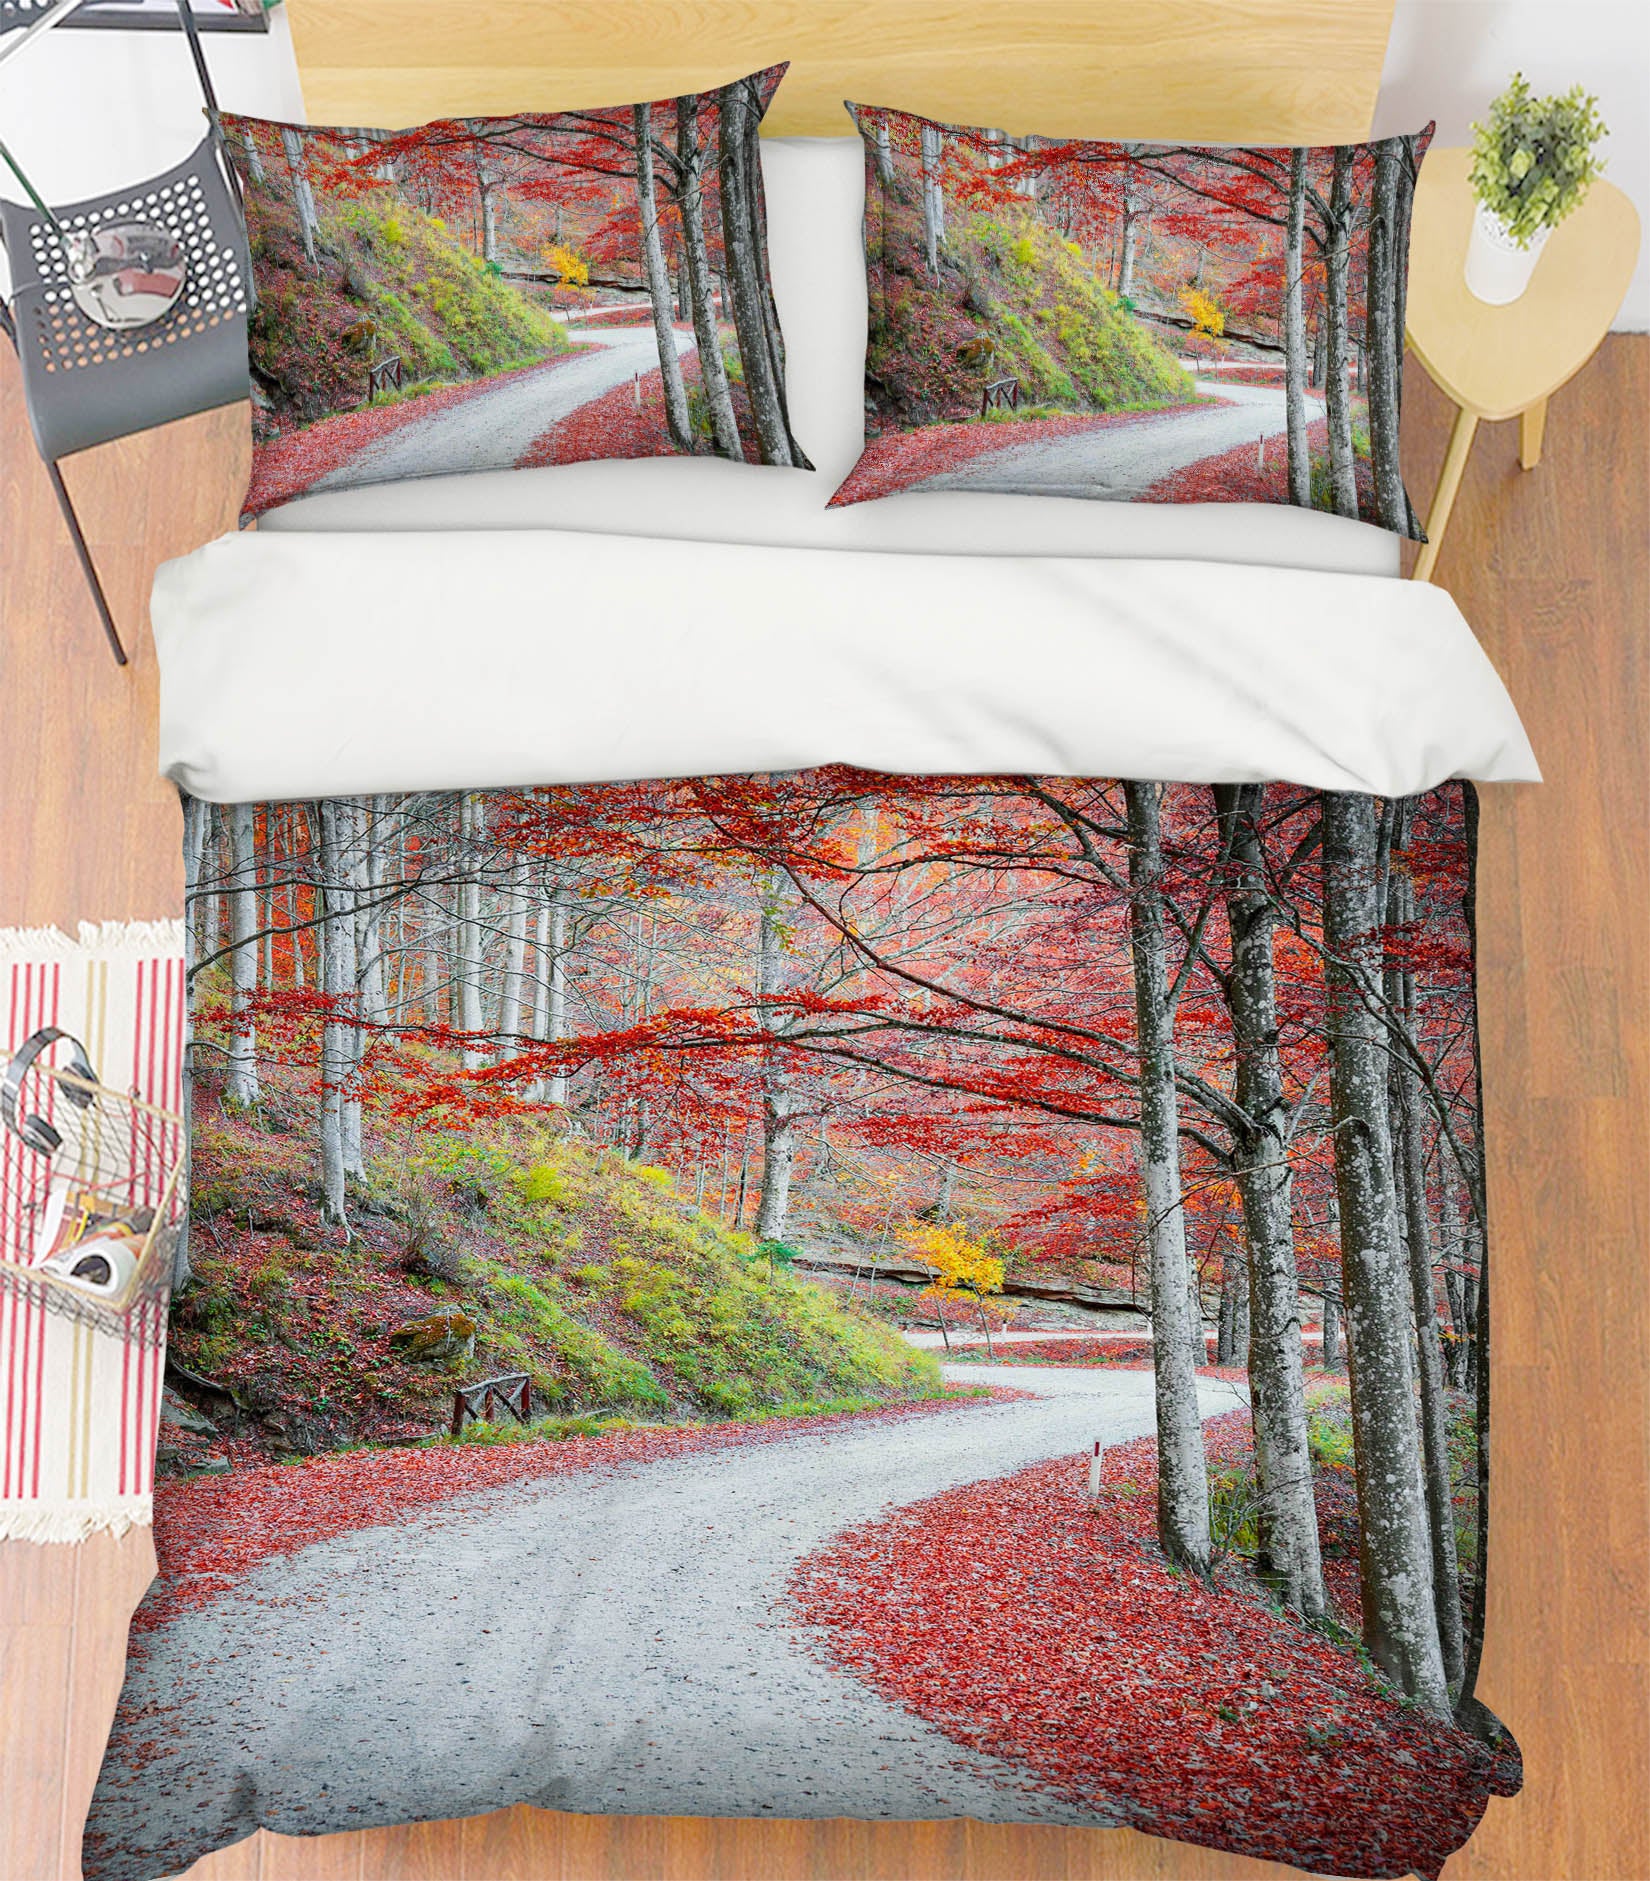 3D Maple Trail 2105 Marco Carmassi Bedding Bed Pillowcases Quilt